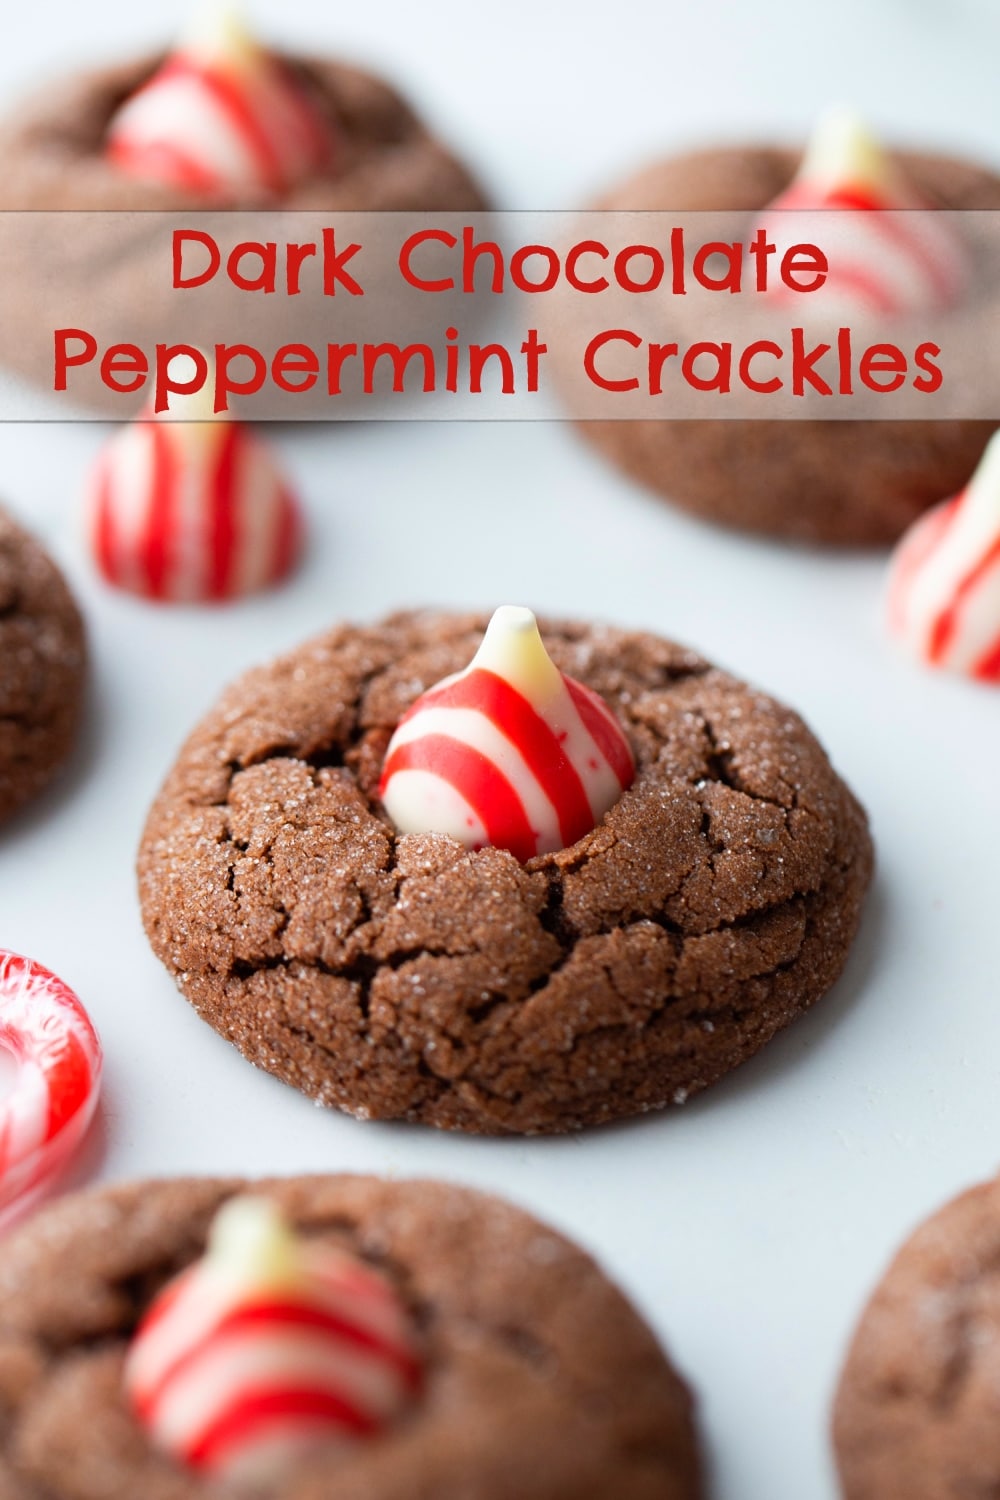 These festive Dark Chocolate Peppermint Crackle Cookies are the perfect treat for the holiday season, combining rich dark chocolate with refreshing peppermint flavor. Their unique crackled texture gives way to robust chocolate flavor that tastes more like a truffle than a cookie.  via @cmpollak1